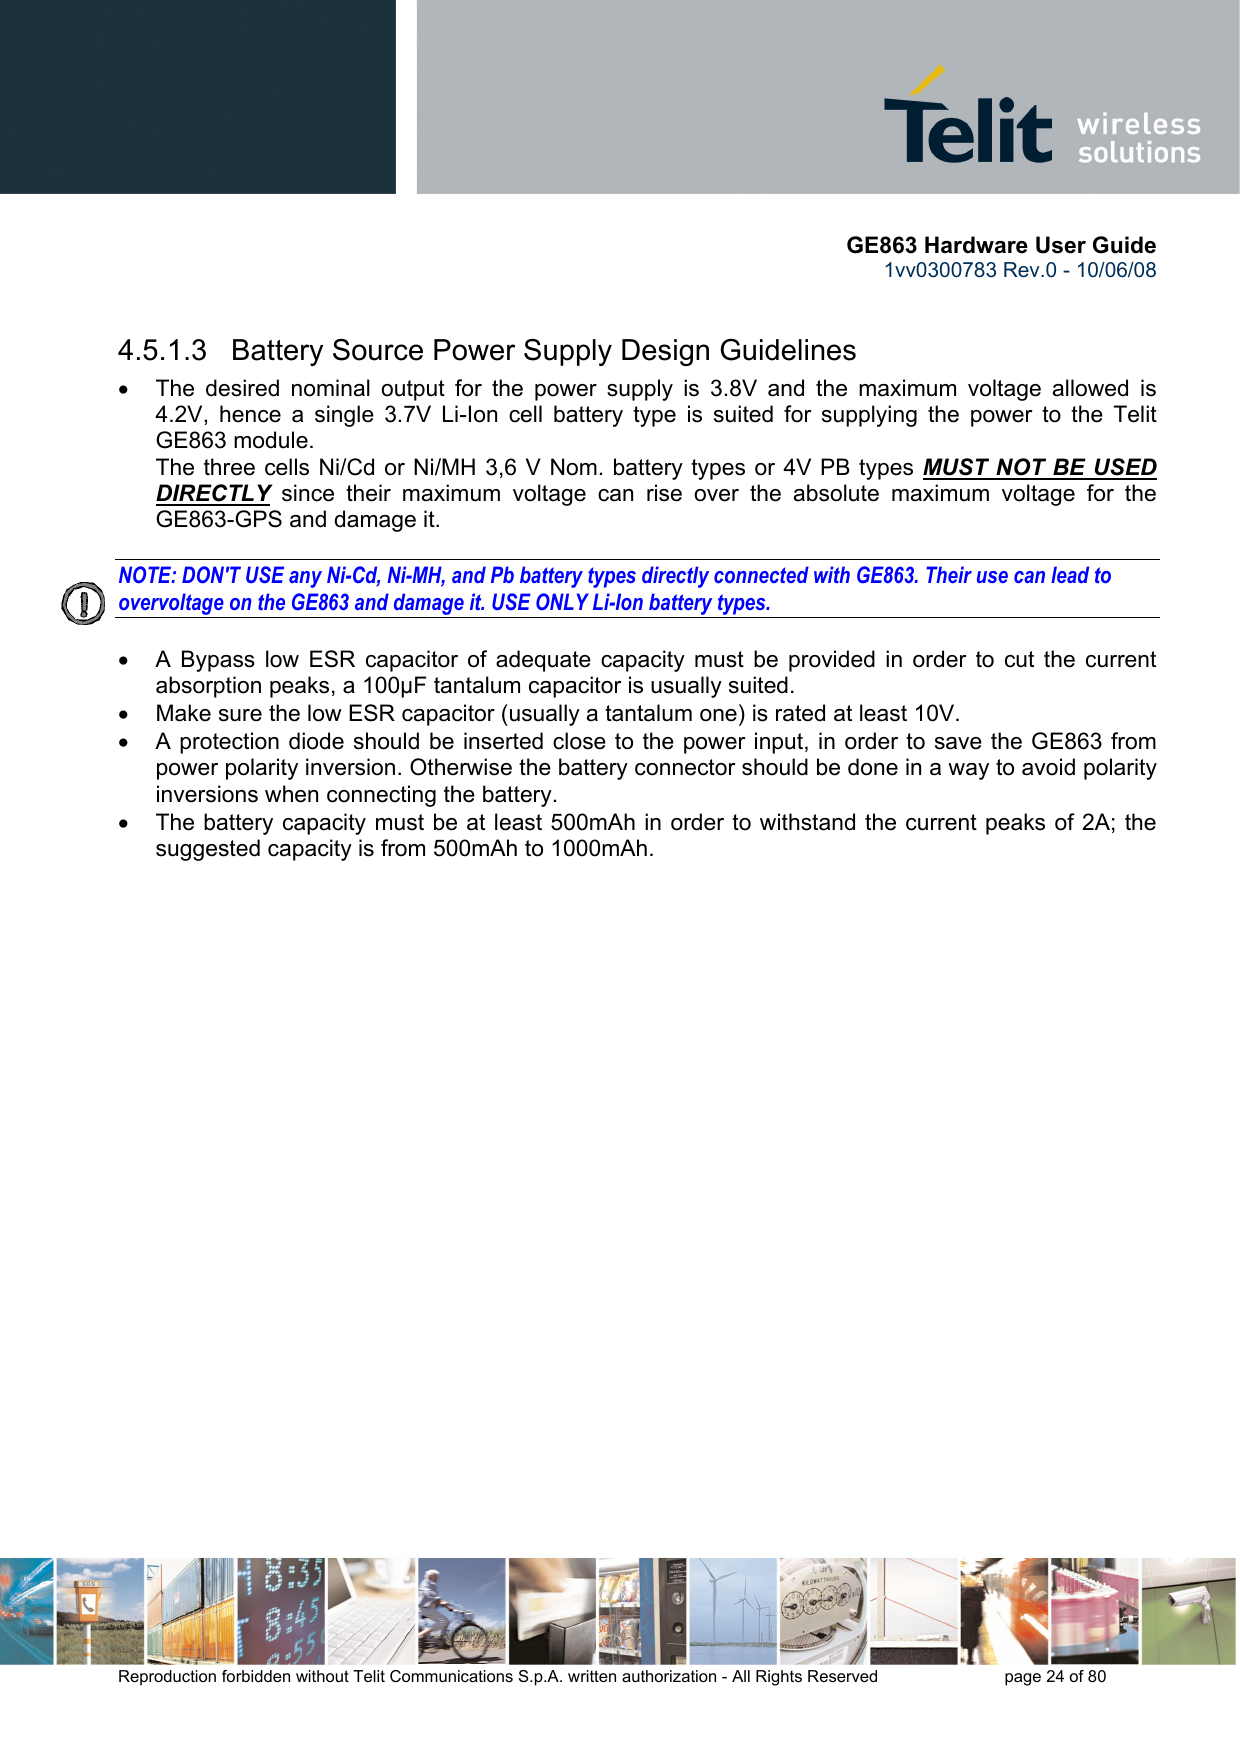       GE863 Hardware User Guide 1vv0300783 Rev.0 - 10/06/08 Reproduction forbidden without Telit Communications S.p.A. written authorization - All Rights Reserved    page 24 of 80   4.5.1.3   Battery Source Power Supply Design Guidelines •  The desired nominal output for the power supply is 3.8V and the maximum voltage allowed is 4.2V, hence a single 3.7V Li-Ion cell battery type is suited for supplying the power to the Telit GE863 module. The three cells Ni/Cd or Ni/MH 3,6 V Nom. battery types or 4V PB types MUST NOT BE USED DIRECTLY since their maximum voltage can rise over the absolute maximum voltage for the GE863-GPS and damage it.  NOTE: DON&apos;T USE any Ni-Cd, Ni-MH, and Pb battery types directly connected with GE863. Their use can lead to overvoltage on the GE863 and damage it. USE ONLY Li-Ion battery types.  •  A Bypass low ESR capacitor of adequate capacity must be provided in order to cut the current absorption peaks, a 100μF tantalum capacitor is usually suited. •  Make sure the low ESR capacitor (usually a tantalum one) is rated at least 10V. •  A protection diode should be inserted close to the power input, in order to save the GE863 from power polarity inversion. Otherwise the battery connector should be done in a way to avoid polarity inversions when connecting the battery. •  The battery capacity must be at least 500mAh in order to withstand the current peaks of 2A; the suggested capacity is from 500mAh to 1000mAh. 